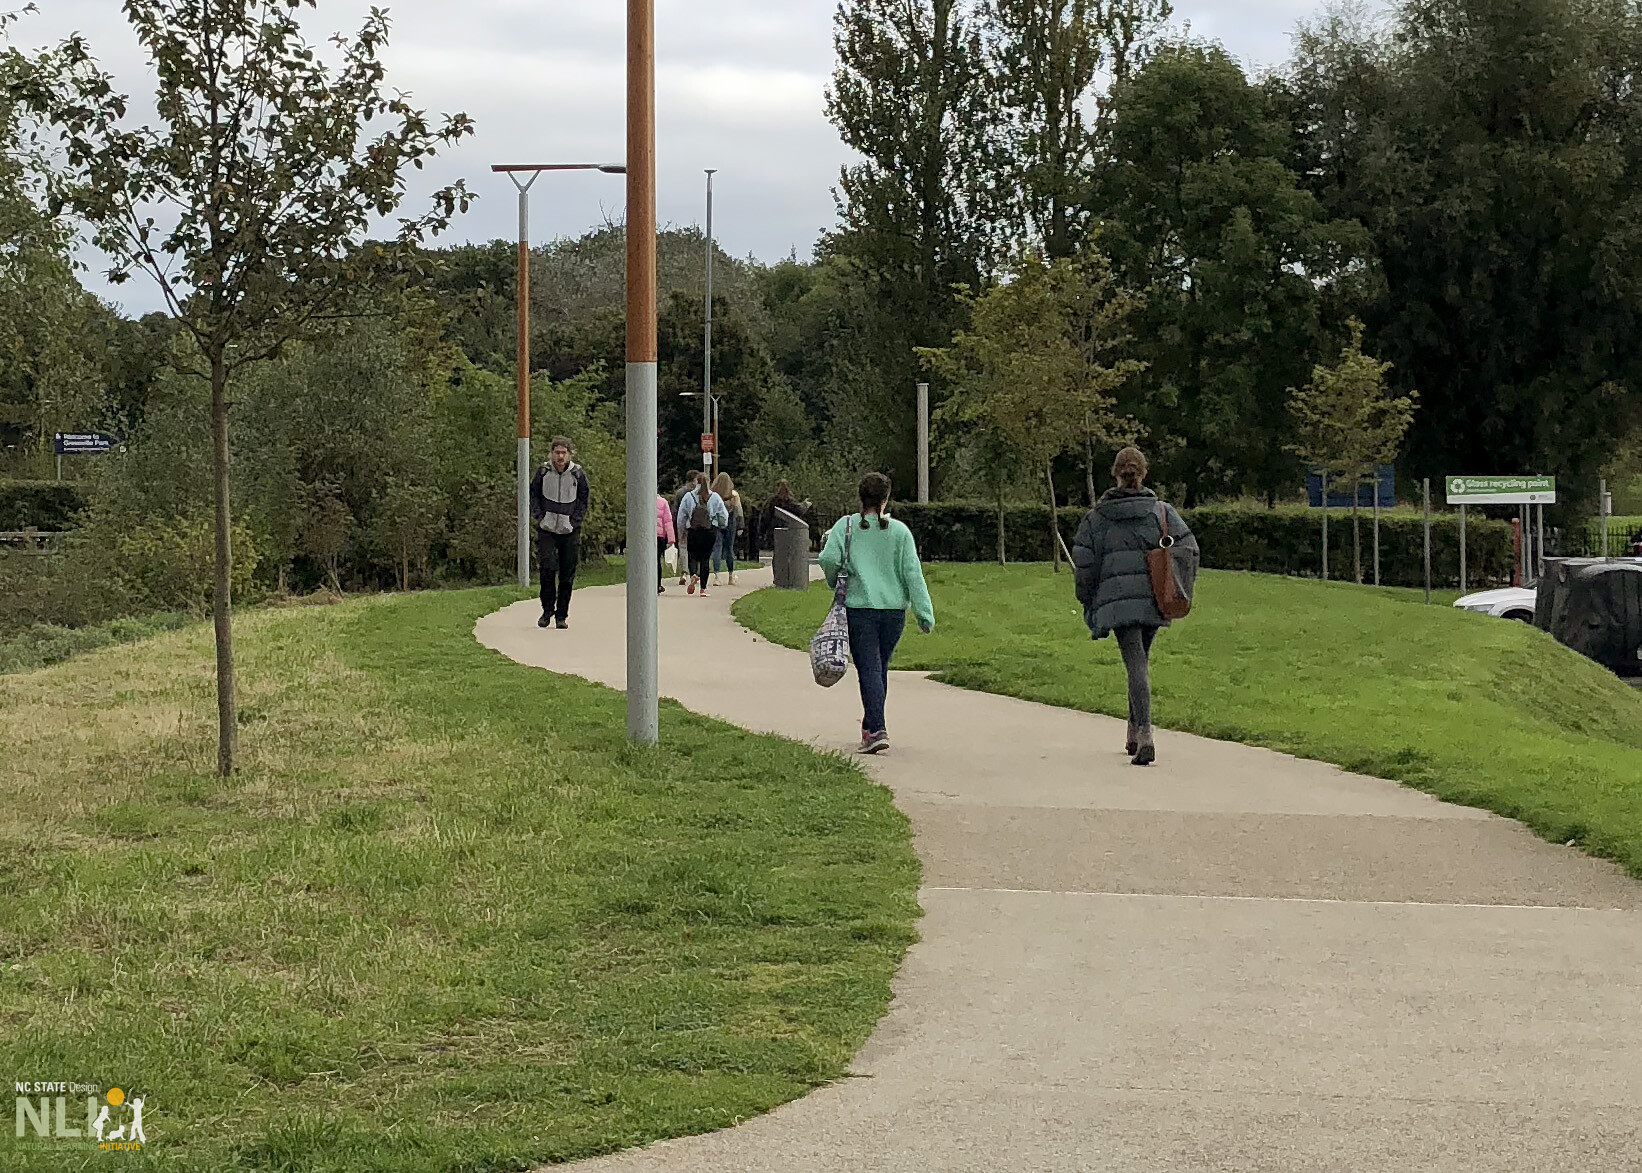 people walking on a pathway